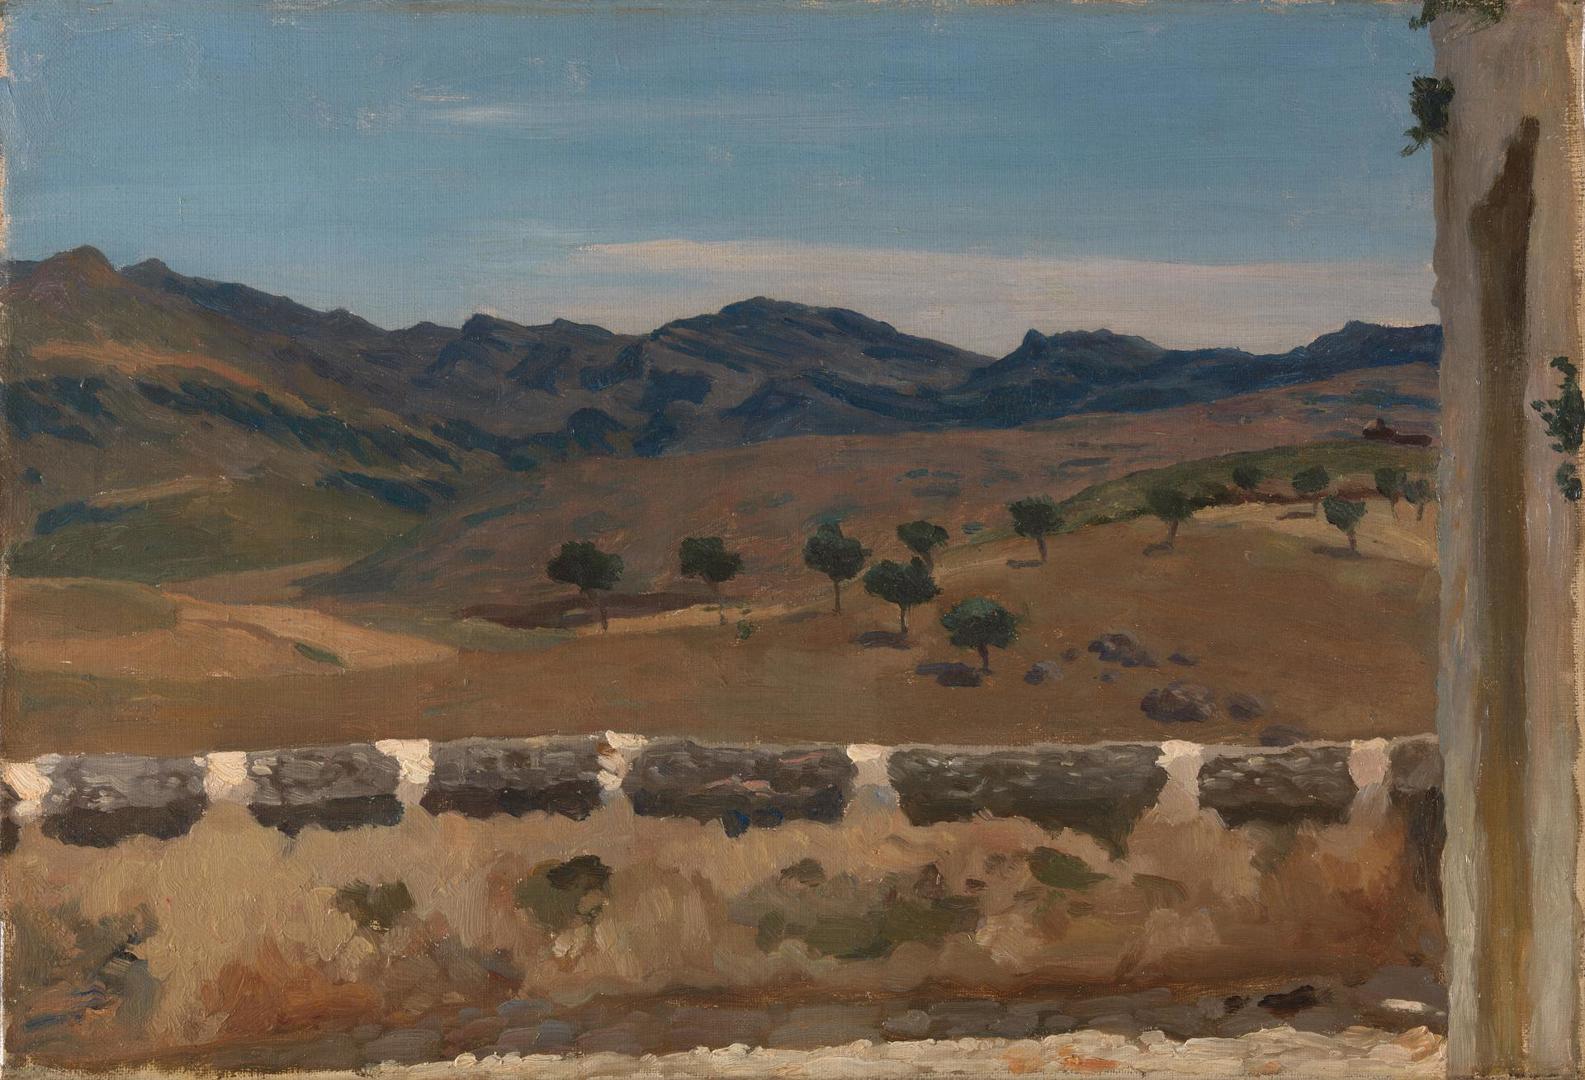 A View in Spain by Frederic, Lord Leighton